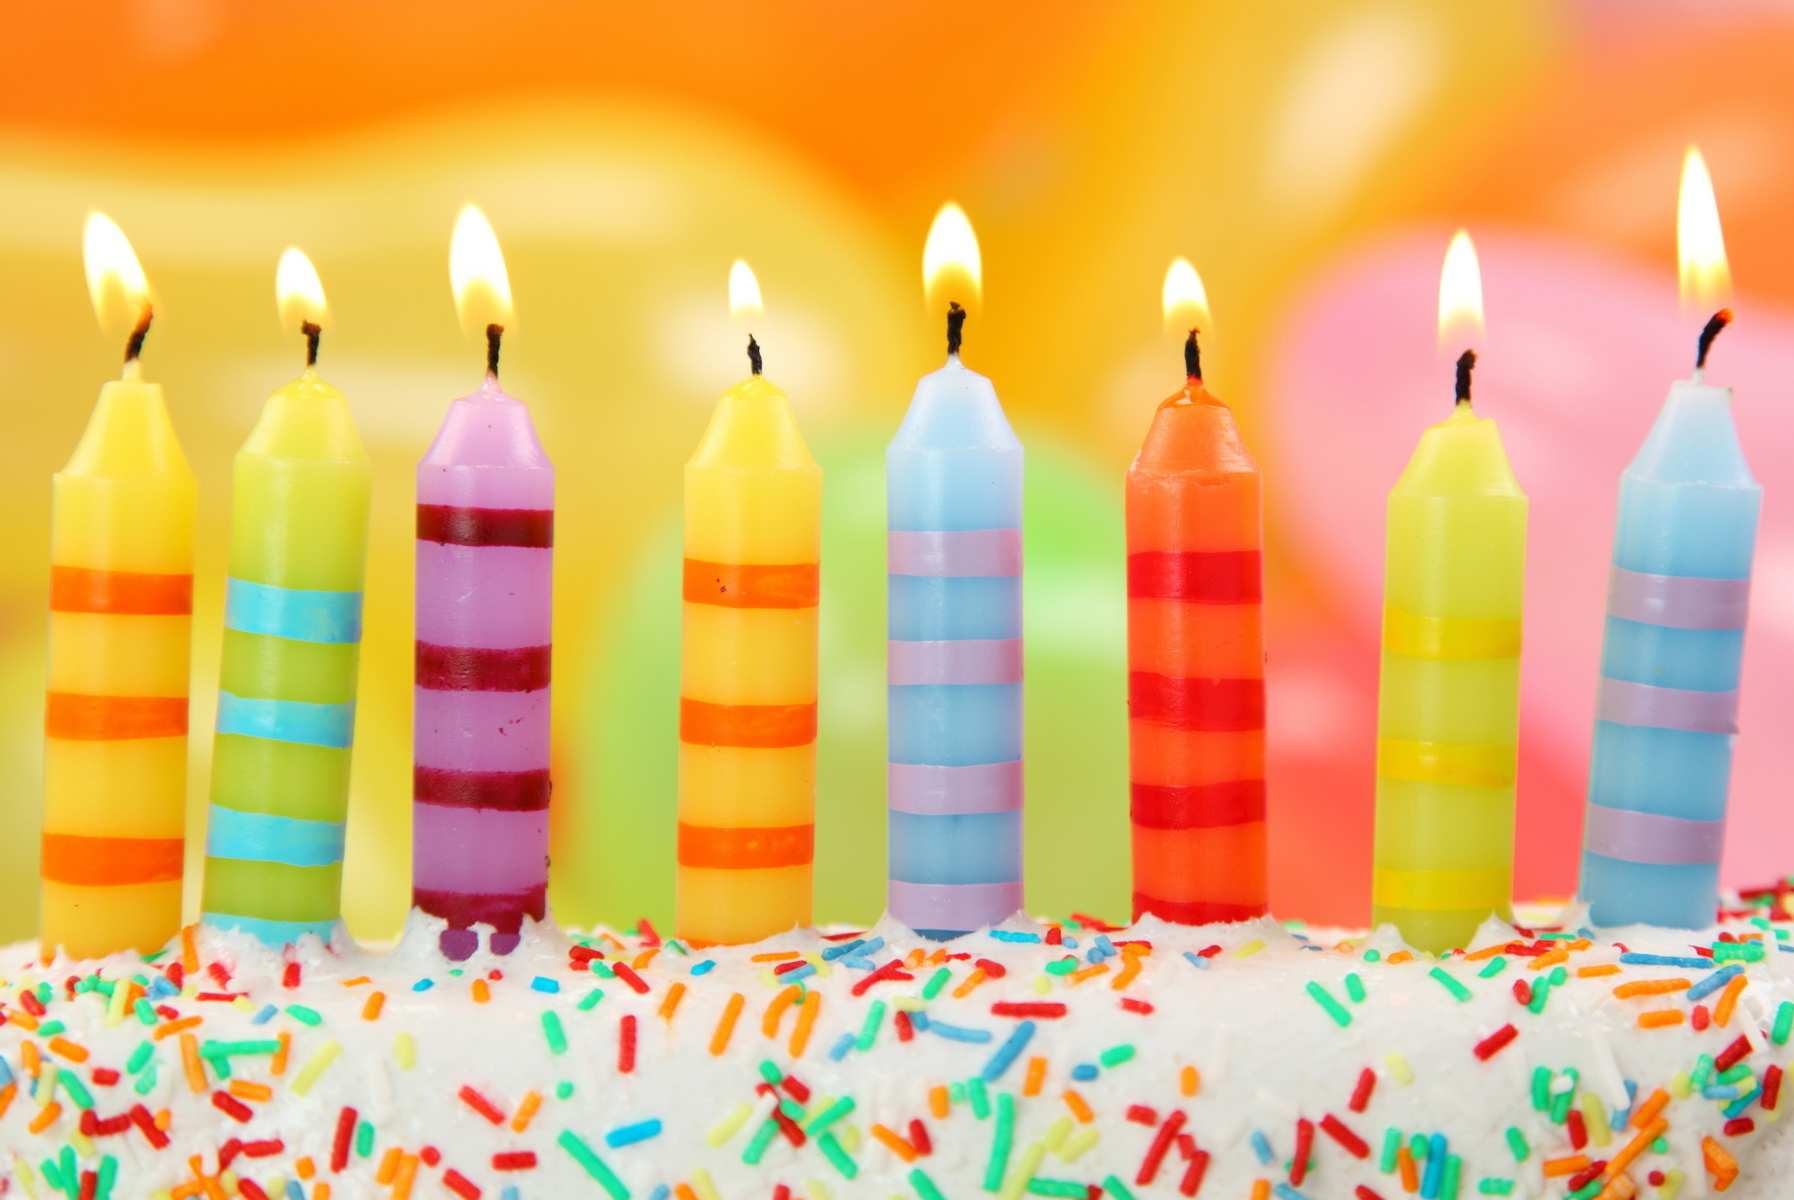 Birthday-Cake-With-Candles-Background.jpg